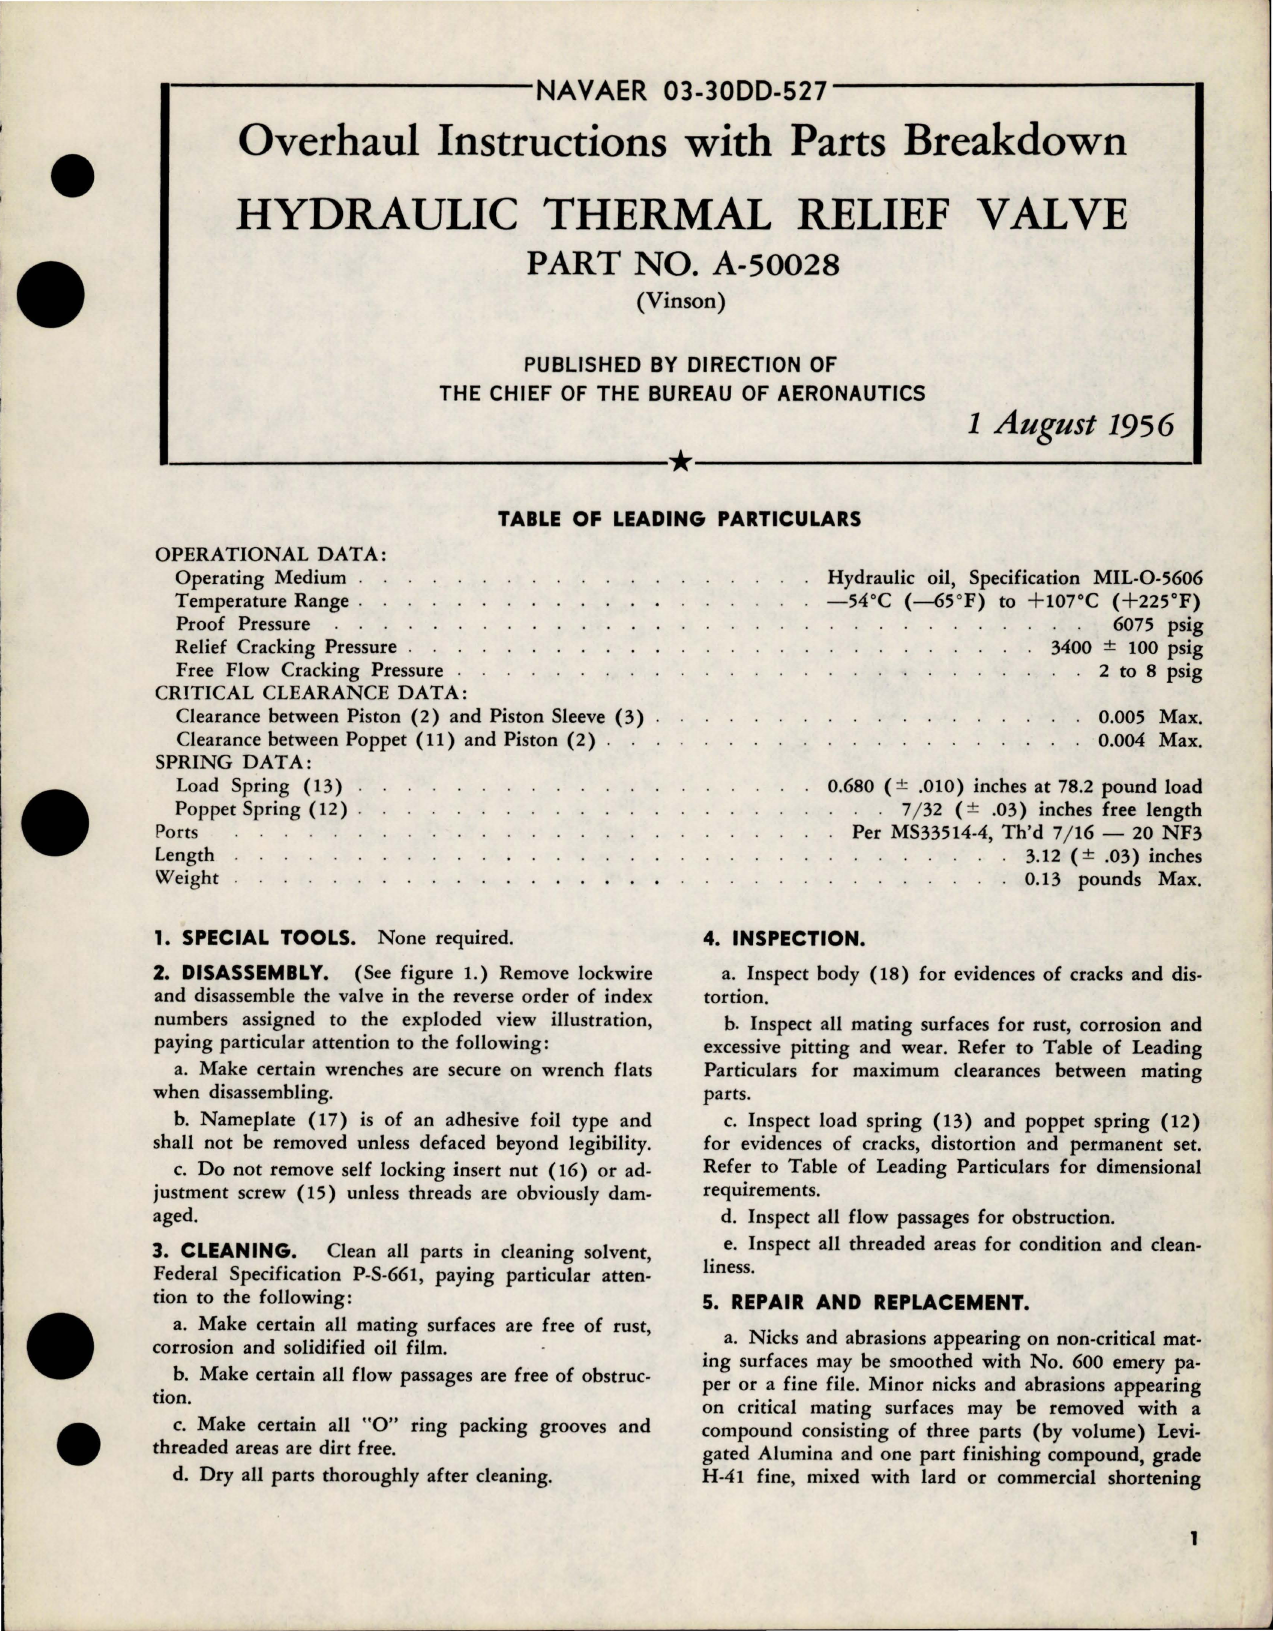 Sample page 1 from AirCorps Library document: Overhaul Instructions with Parts Breakdown for Hydraulic Thermal Relief Valve - Part A-50028 